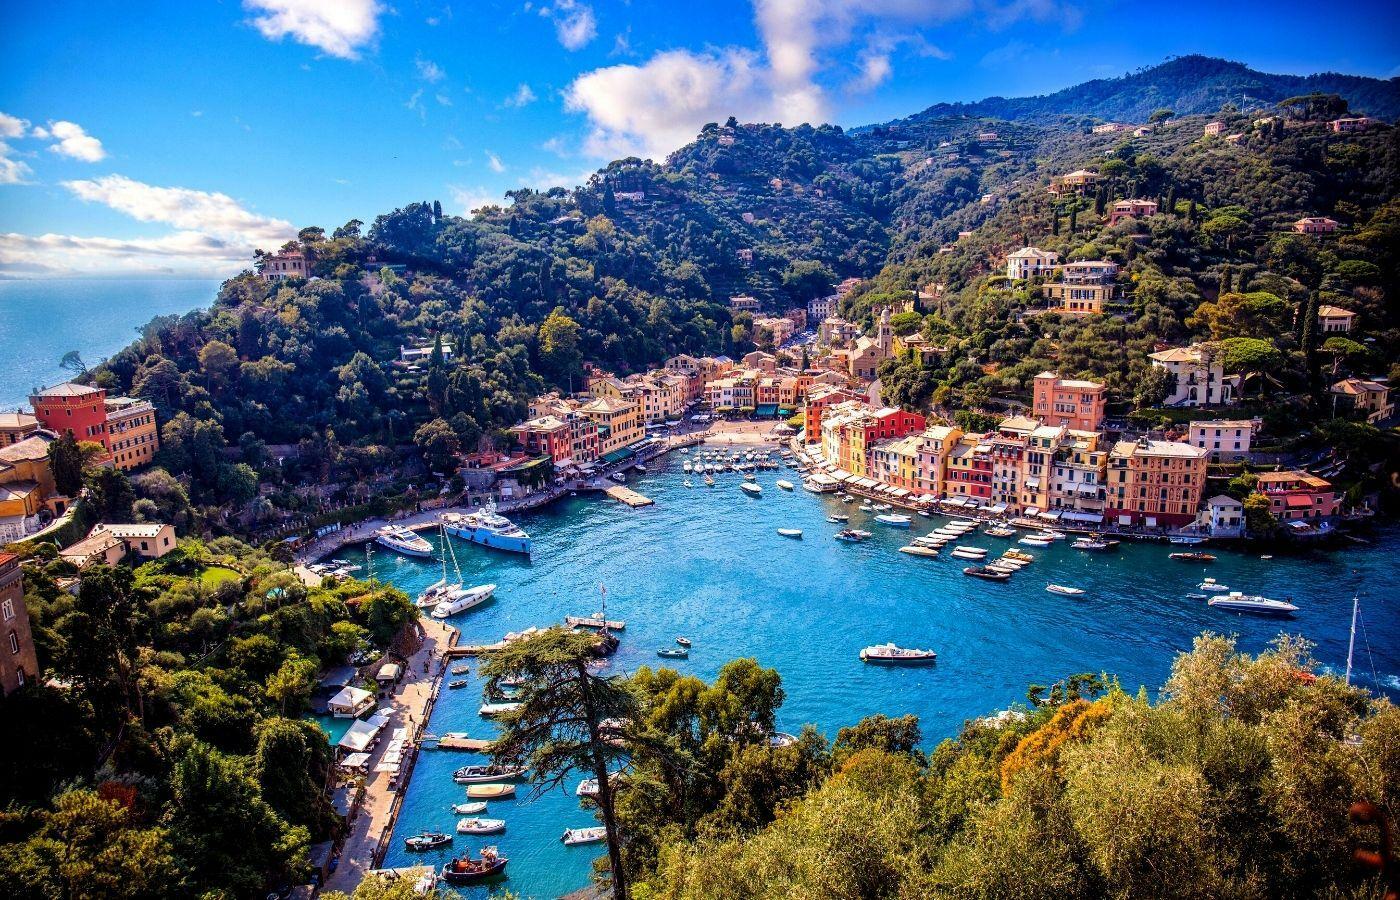 Sailing Trips to Portofino to see 11 attractions | Signature Sailing Charter